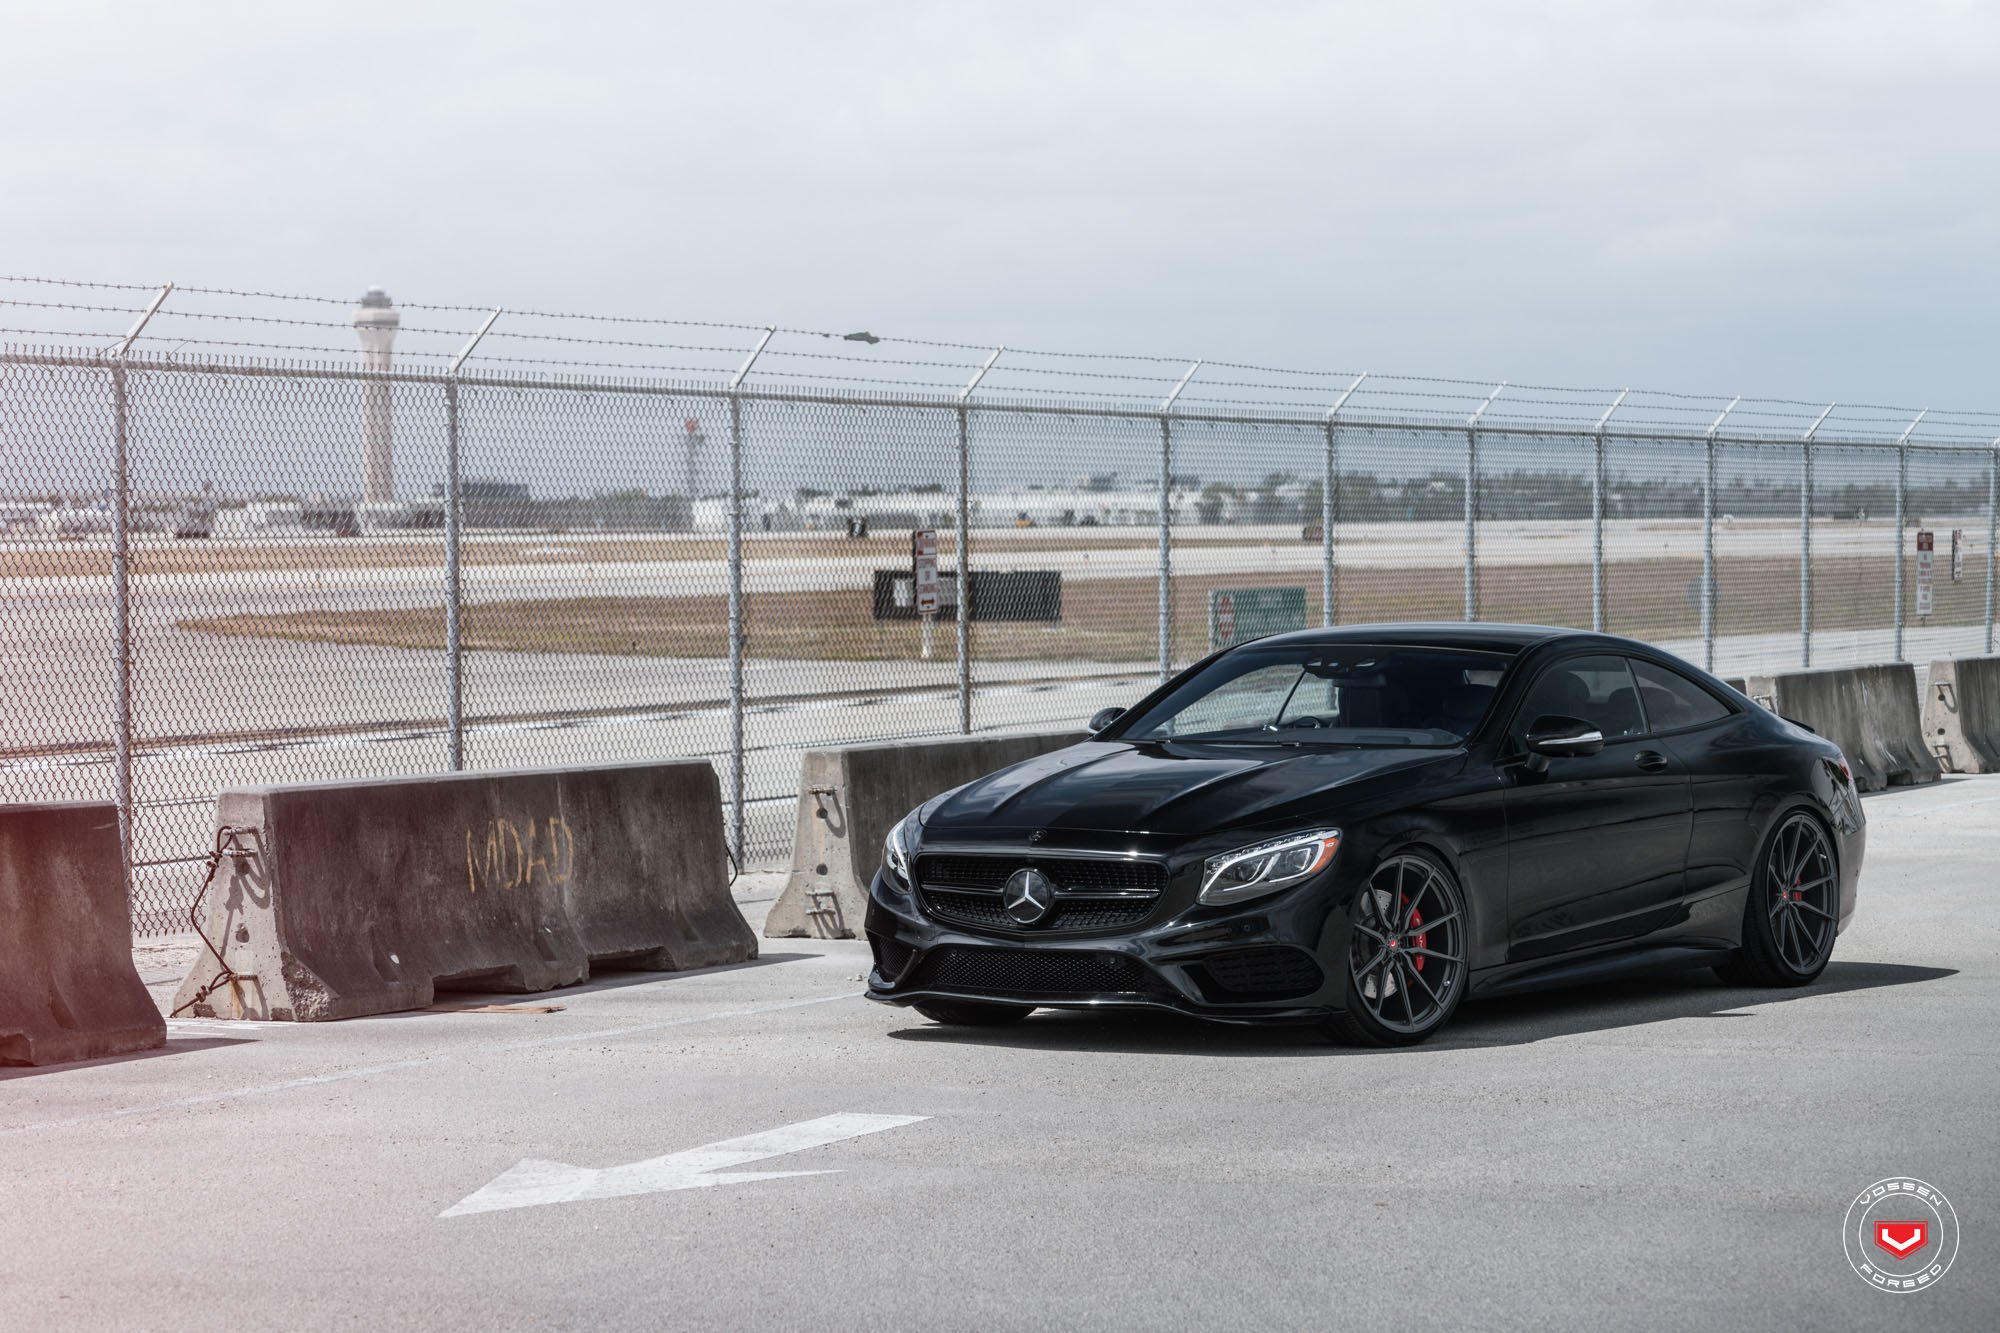 Blacked Out Mesh Grille on Mercedes S Class - Photo by Vossen